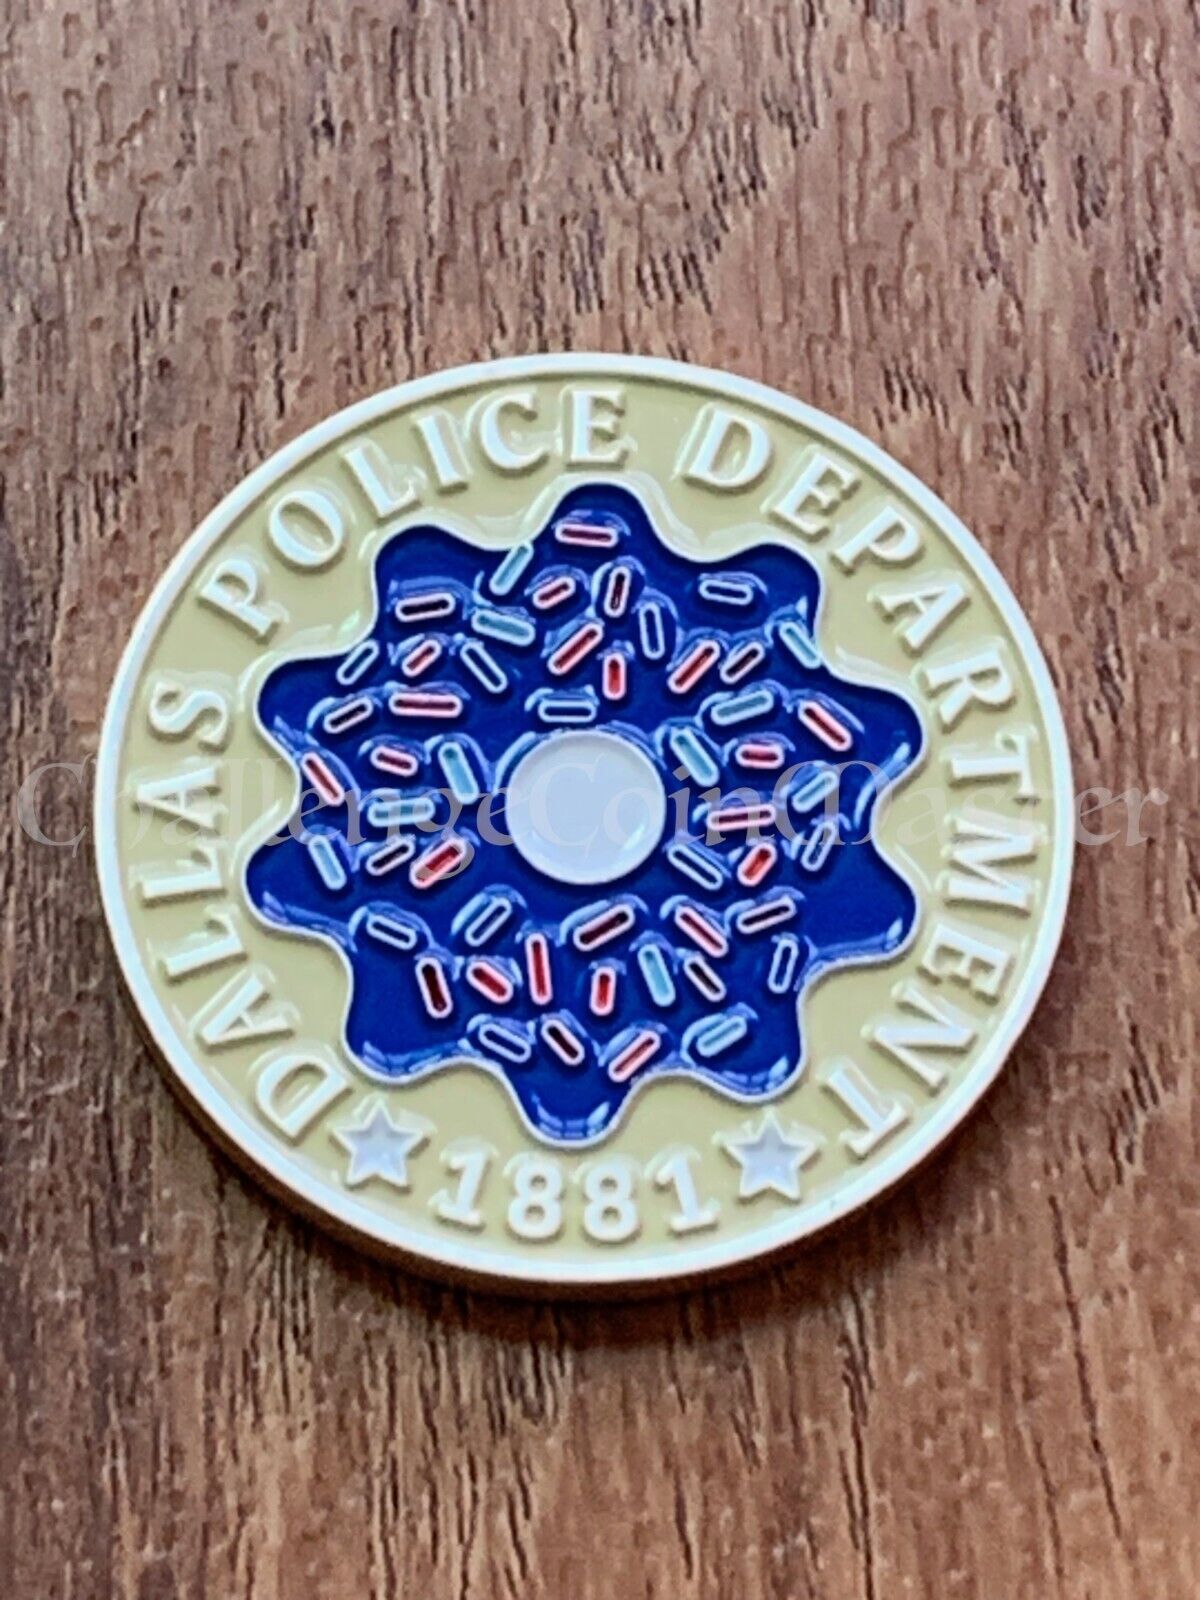 E91 Dallas Police Department Texas State Donut Challenge Coin